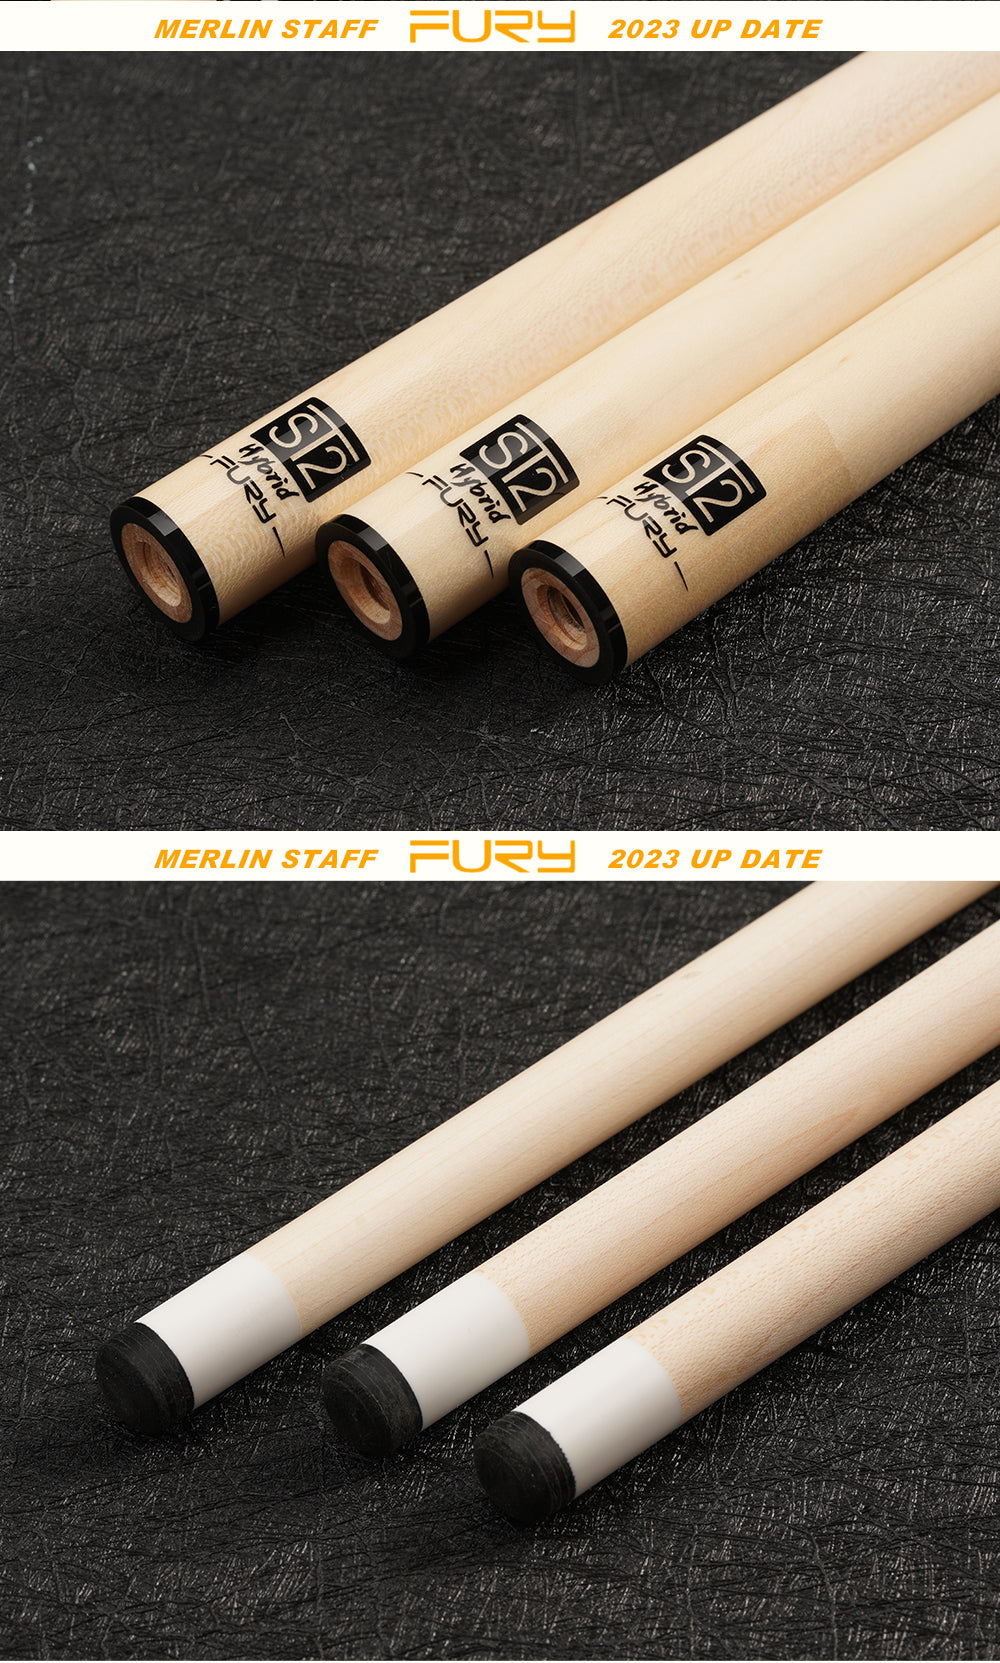 Fury LC Series Pool Cue Stick Kit Billiard Canadian Maple Shaft 12.5mm Tip Center Joint Radial Digital Engraving Bare Wrap Stick